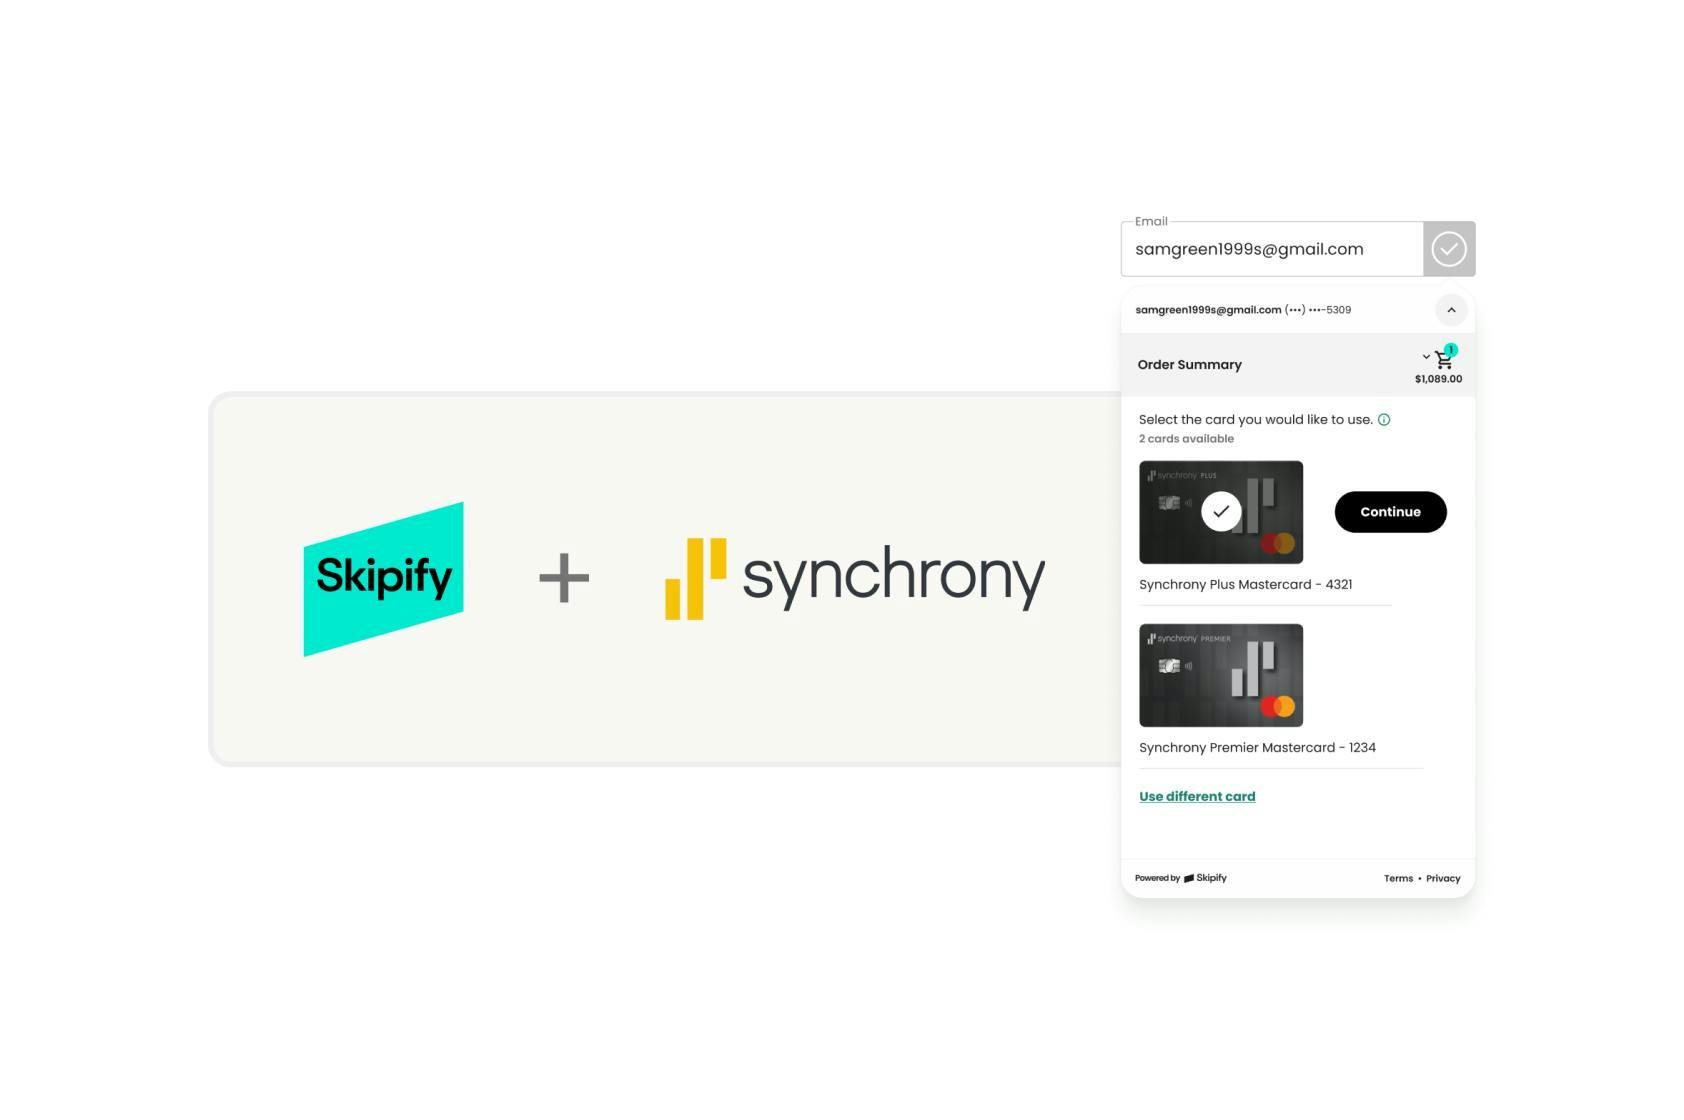 Skipify and Synchrony logo next to an image of Skipify Connected Wallet with Synchrony credit cards